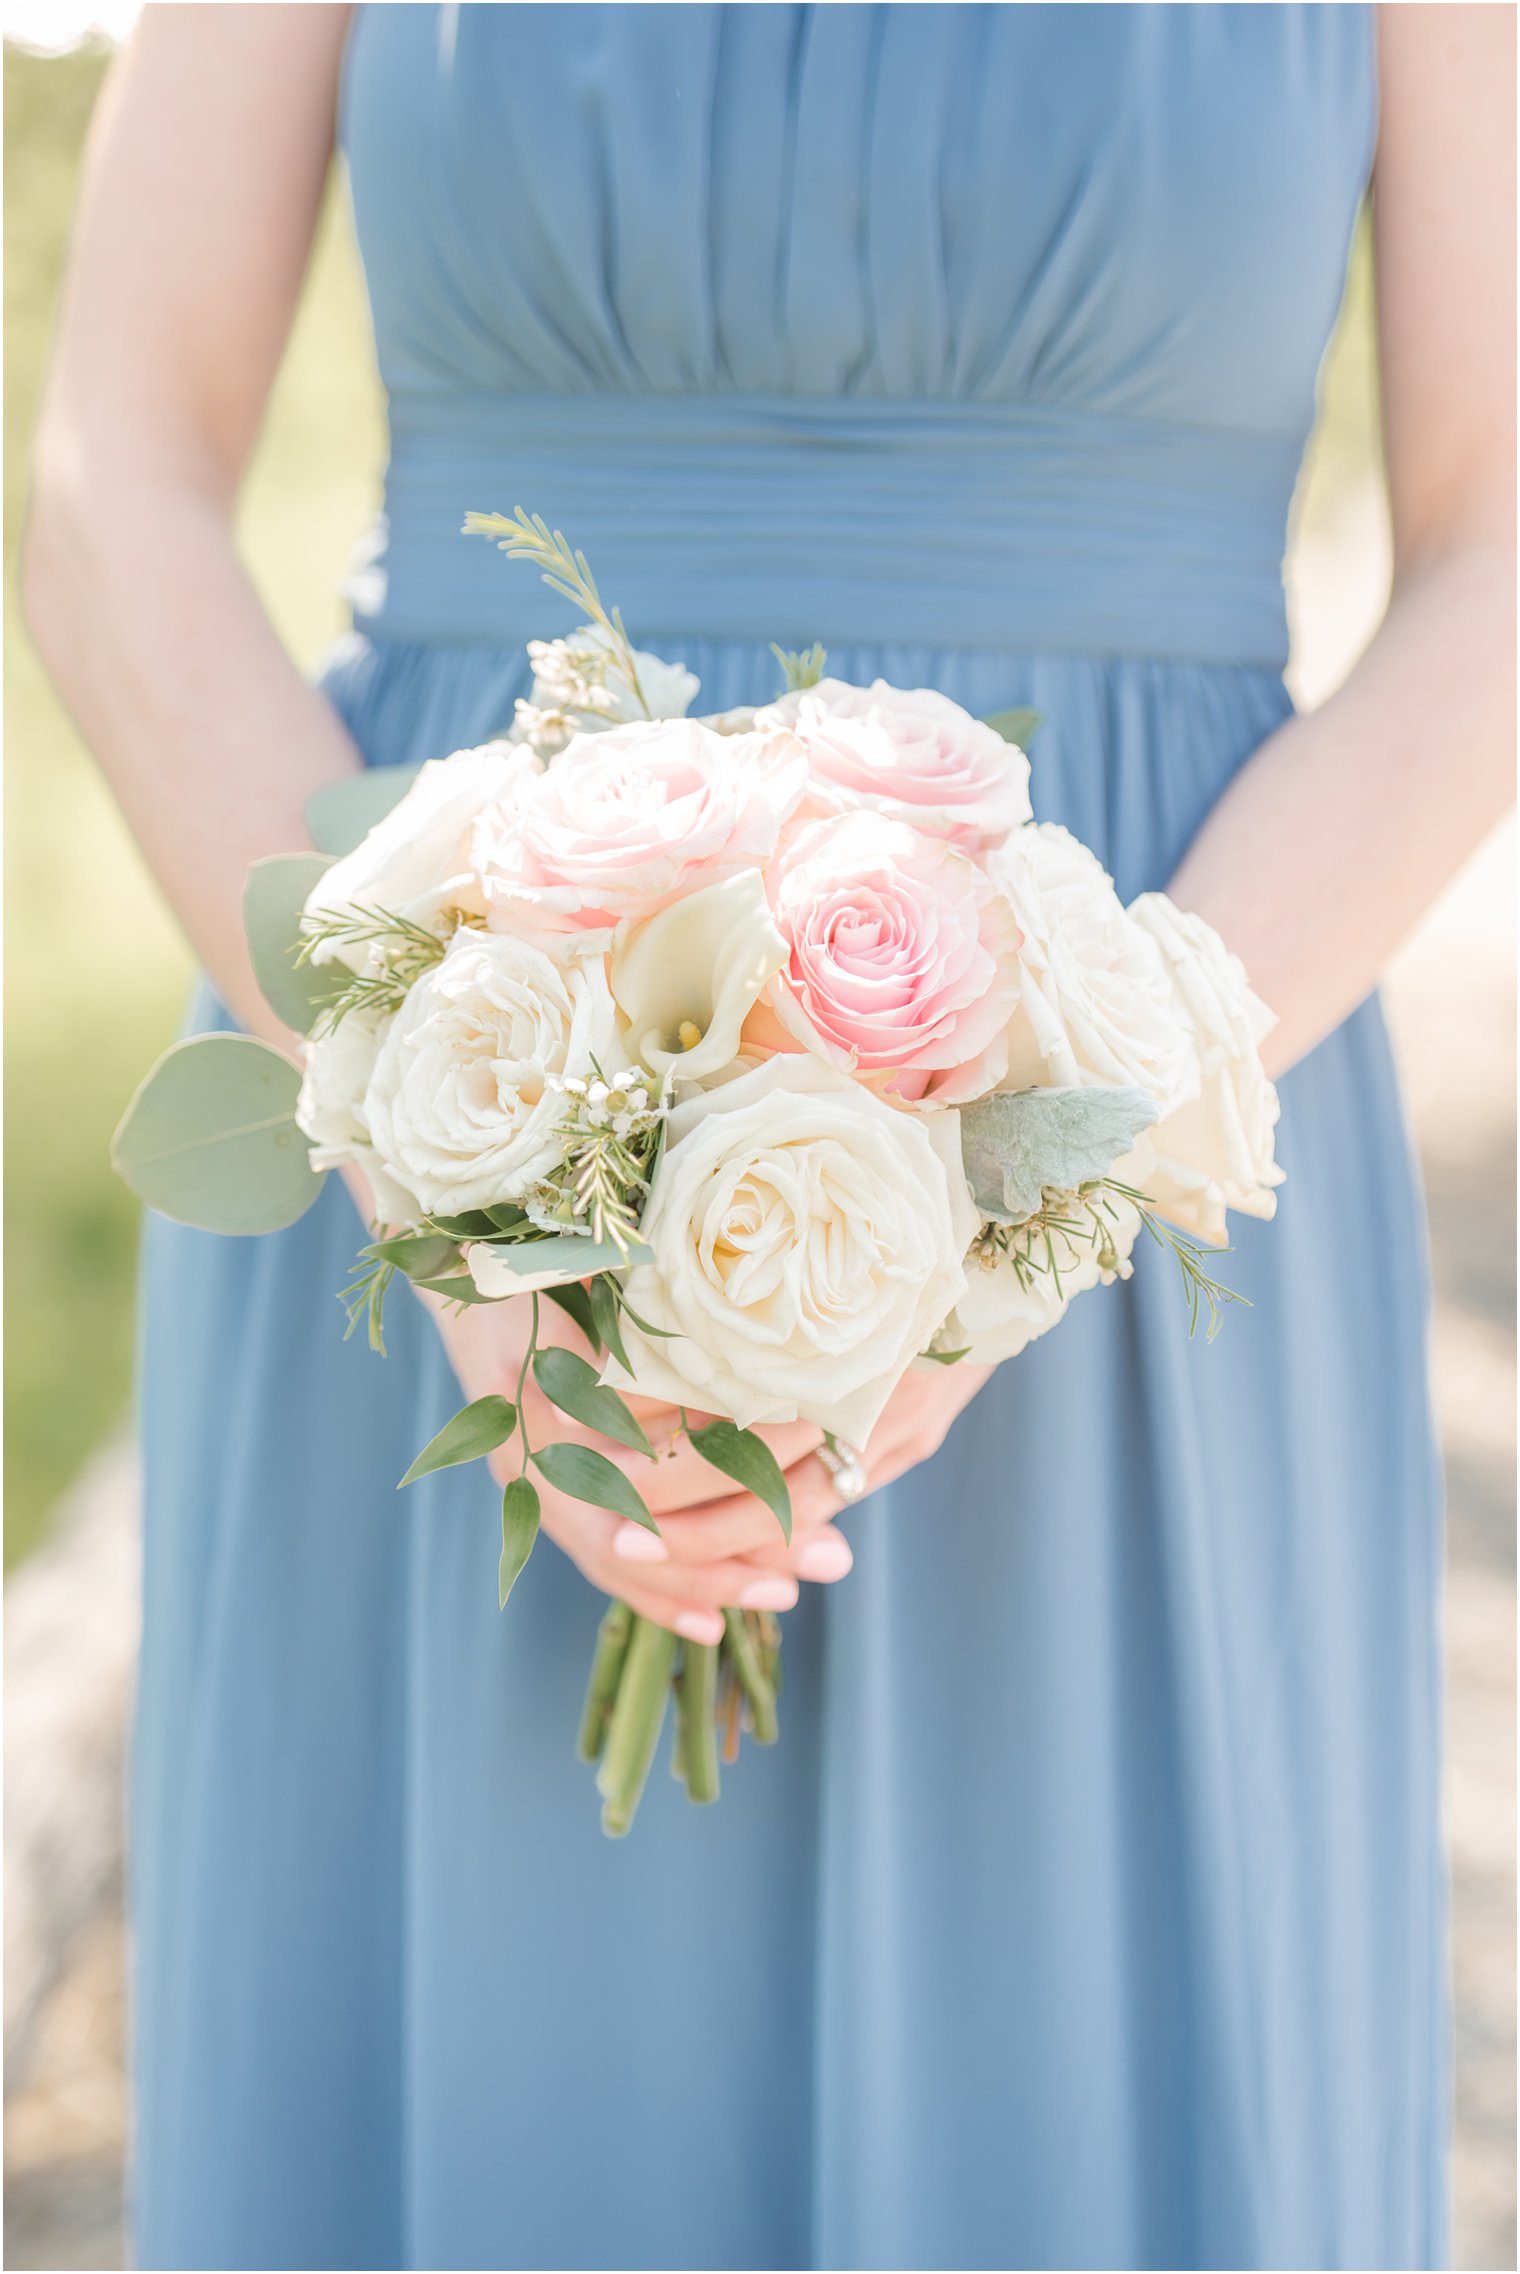 Bridesmaid bouquet by Bespoke Floral and Event Design | Windows on the Water at Frogbridge in Millstone NJ